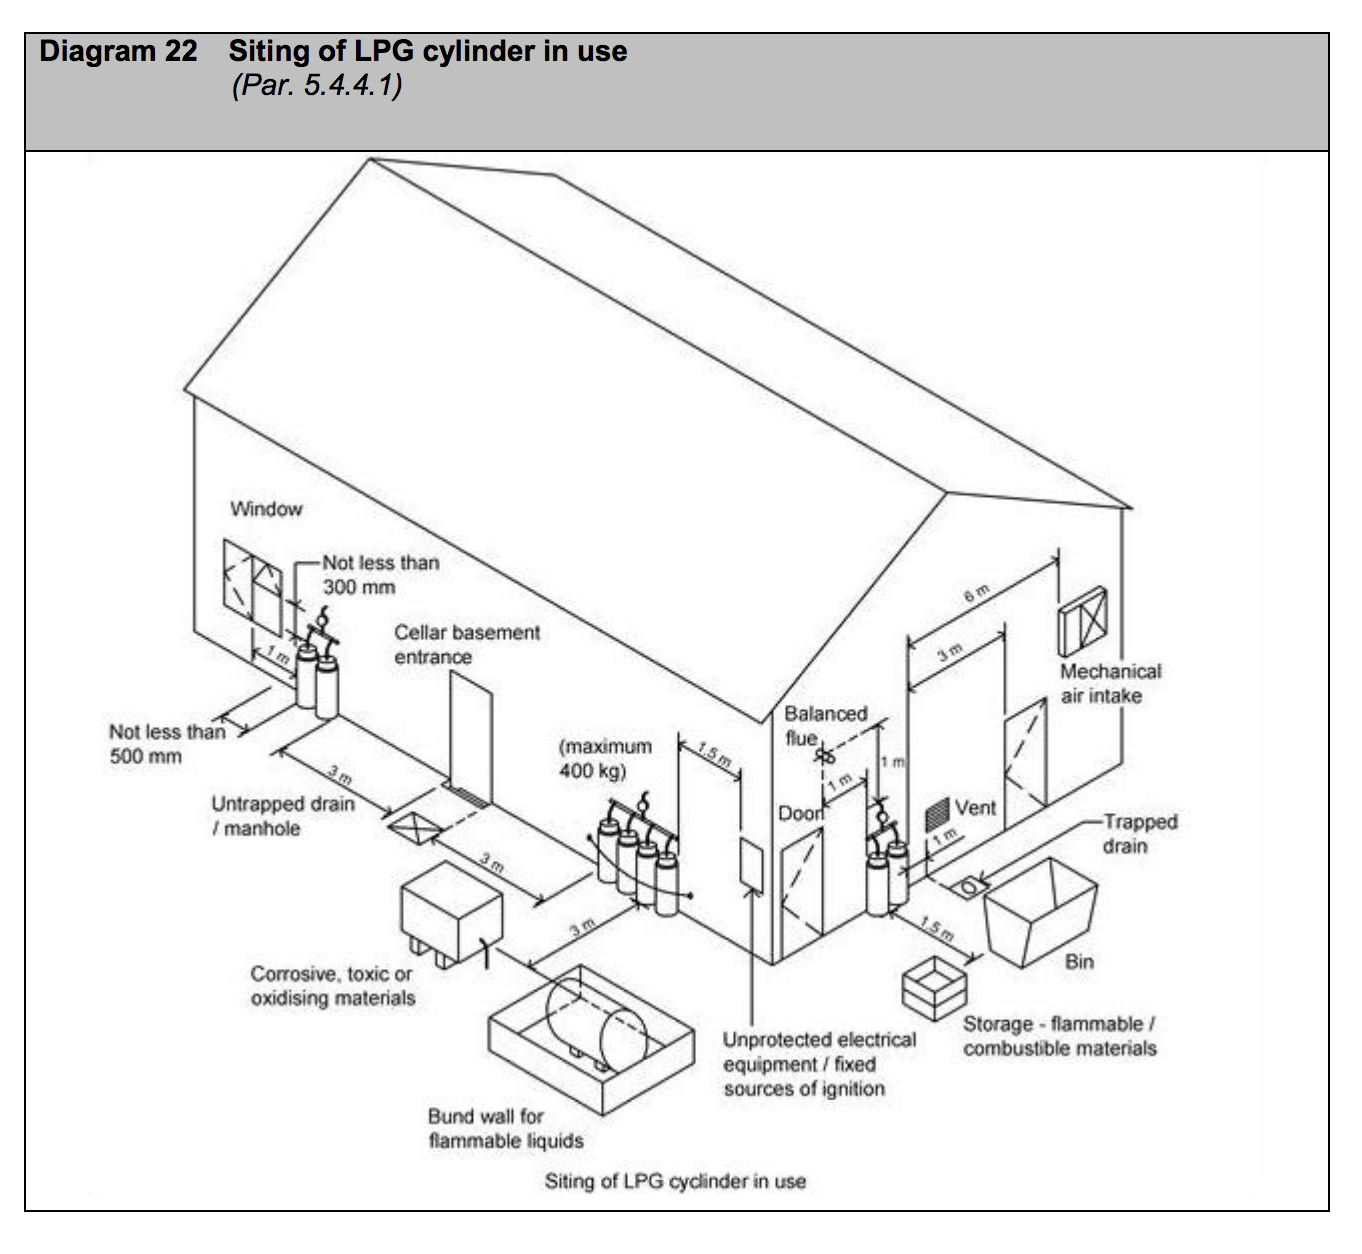 Diagram HJ22 - Siting of LPG cylinder in use - Extract from TGD J